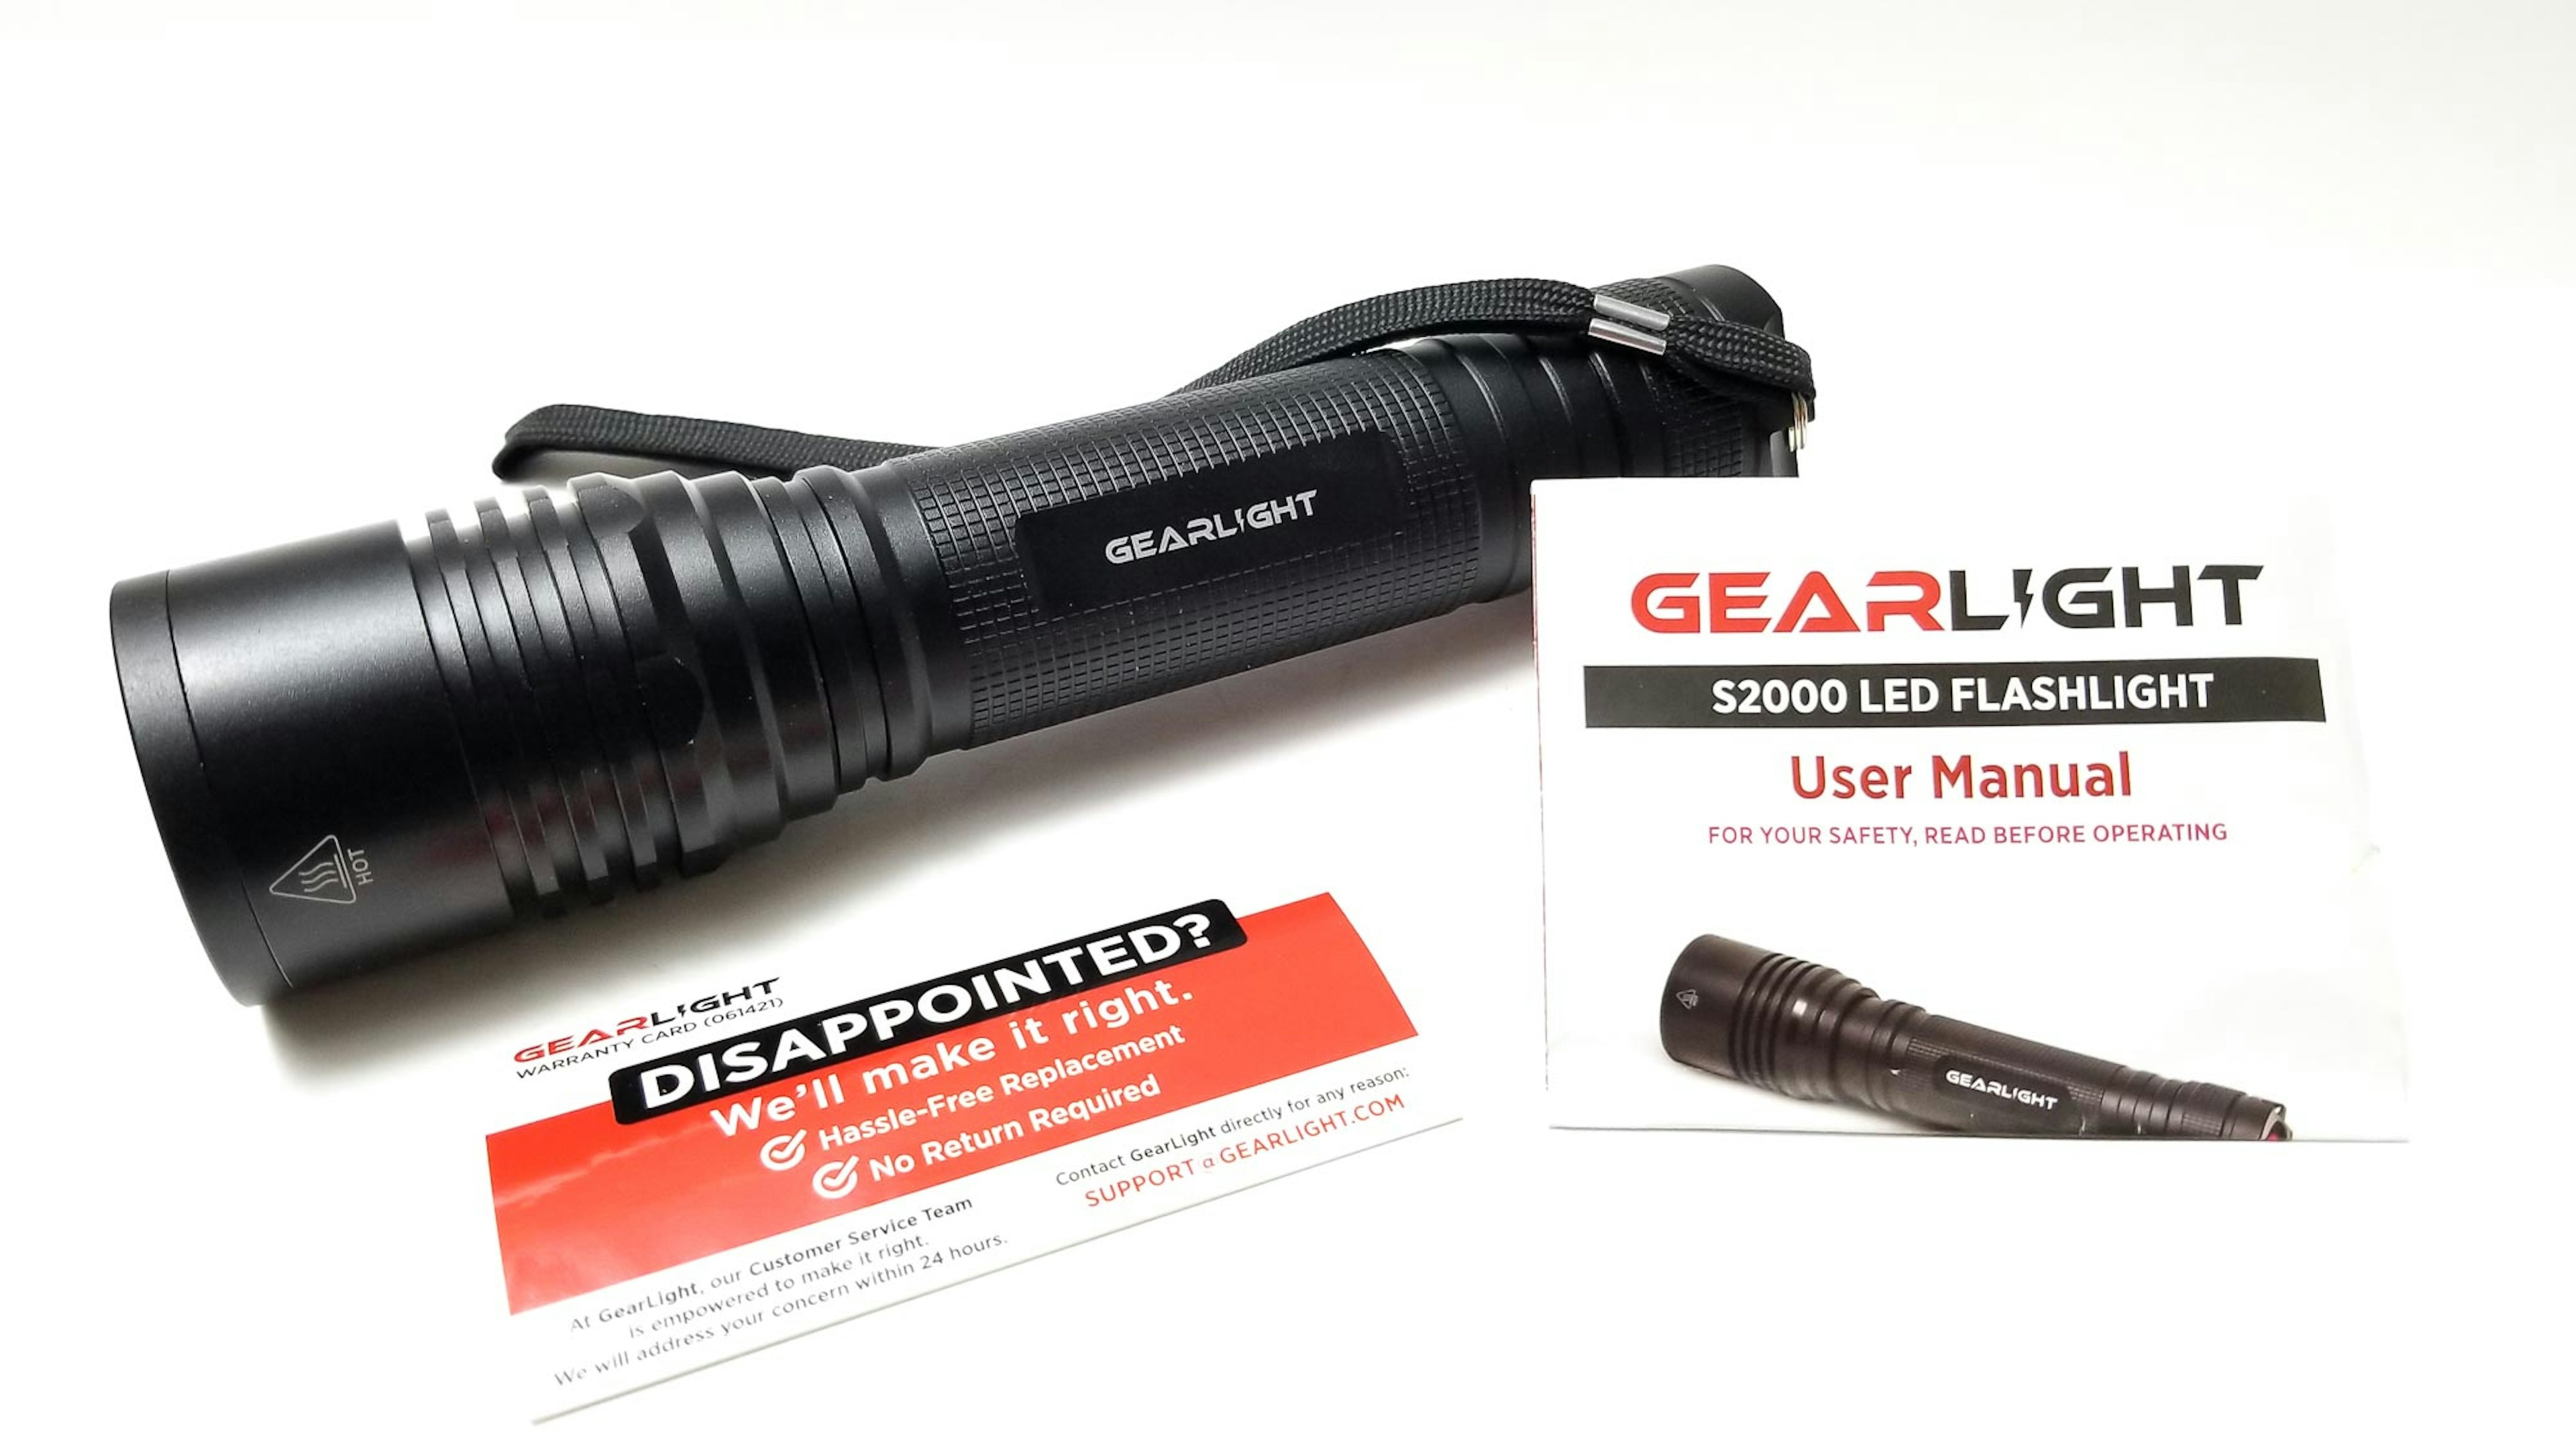 Best Flashlight for Delivery Drivers - GearLight High-Powered Led Flashlight S2000